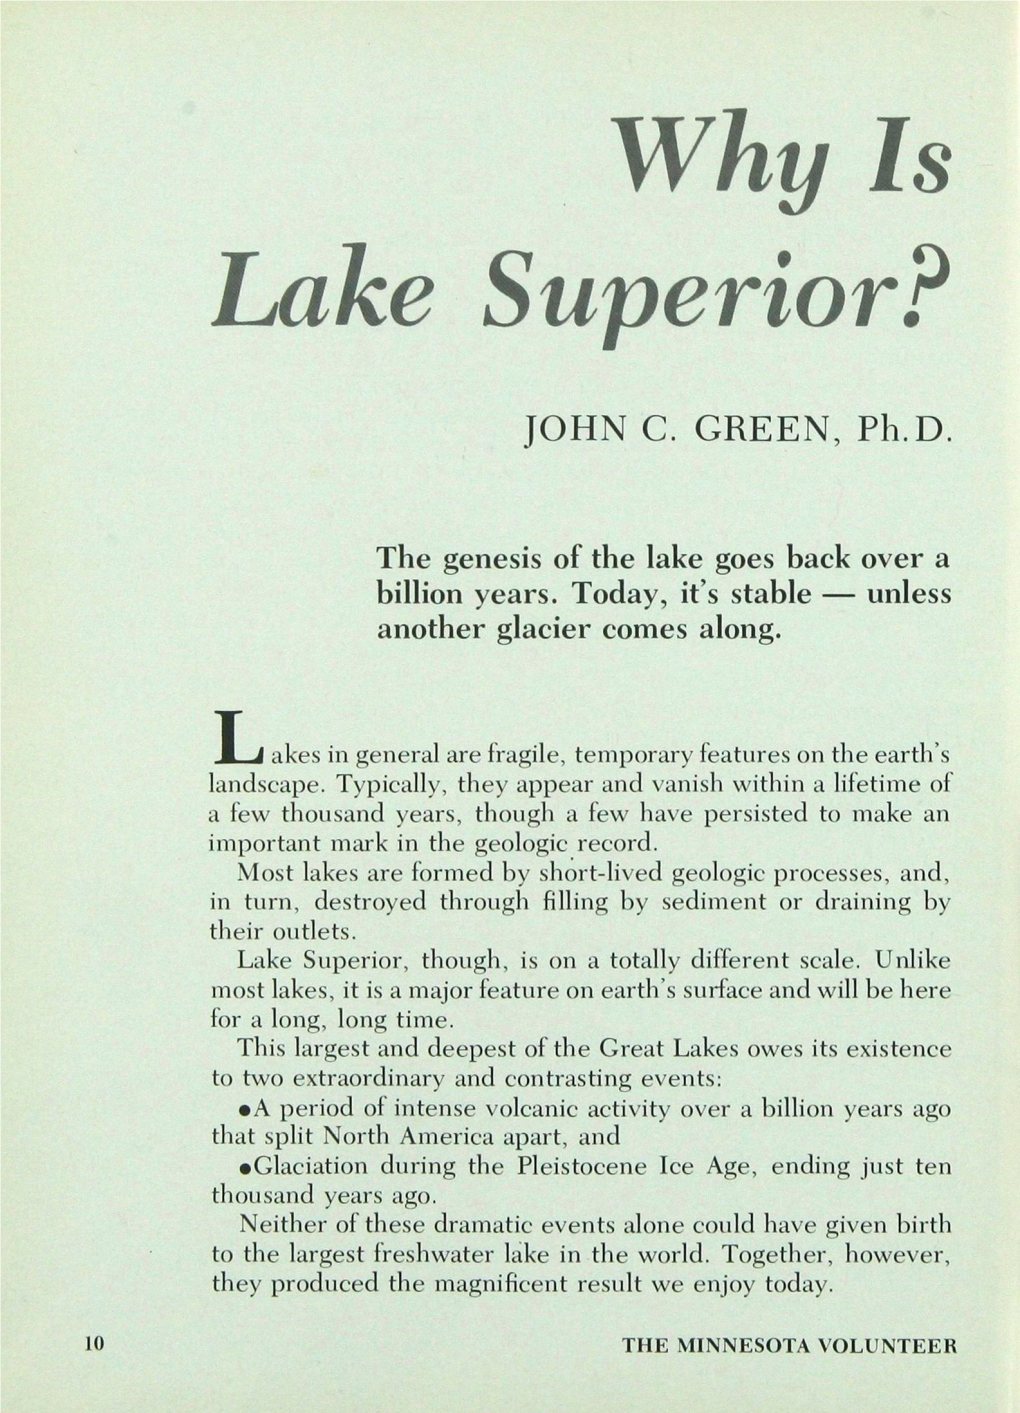 Why Is Lake Superior?